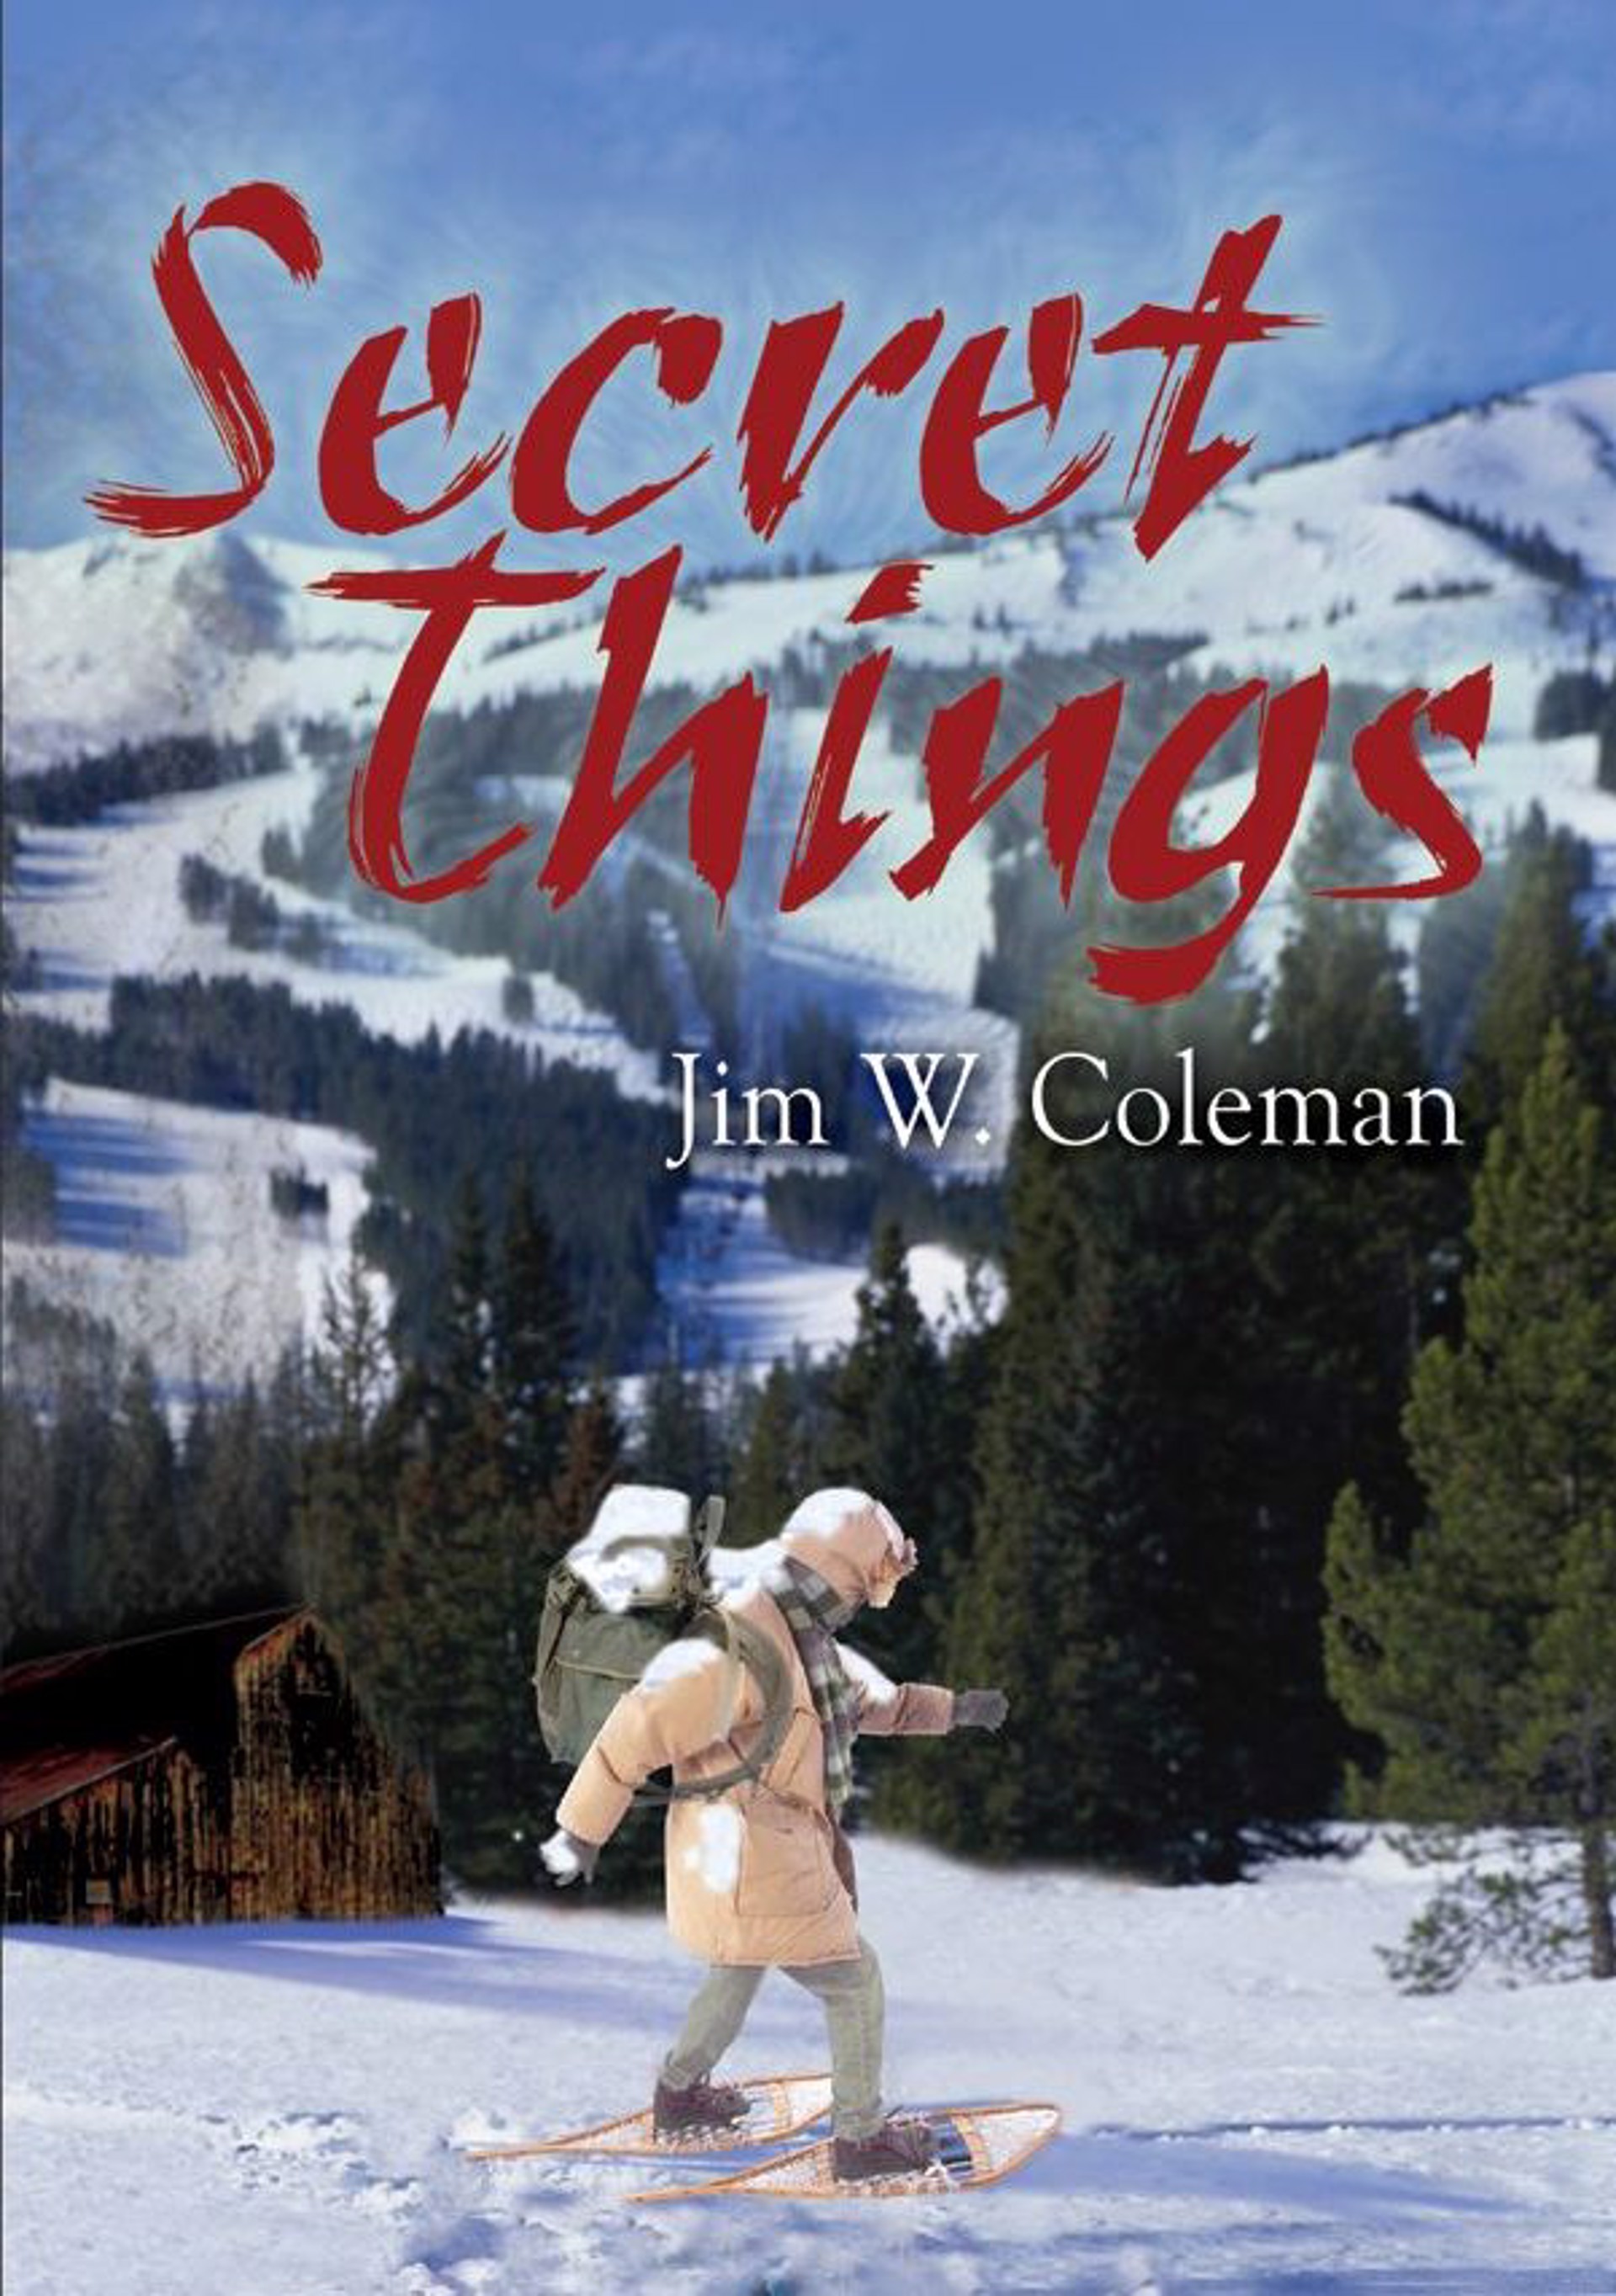 Secret Things - Softcover by Jim W. Coleman III